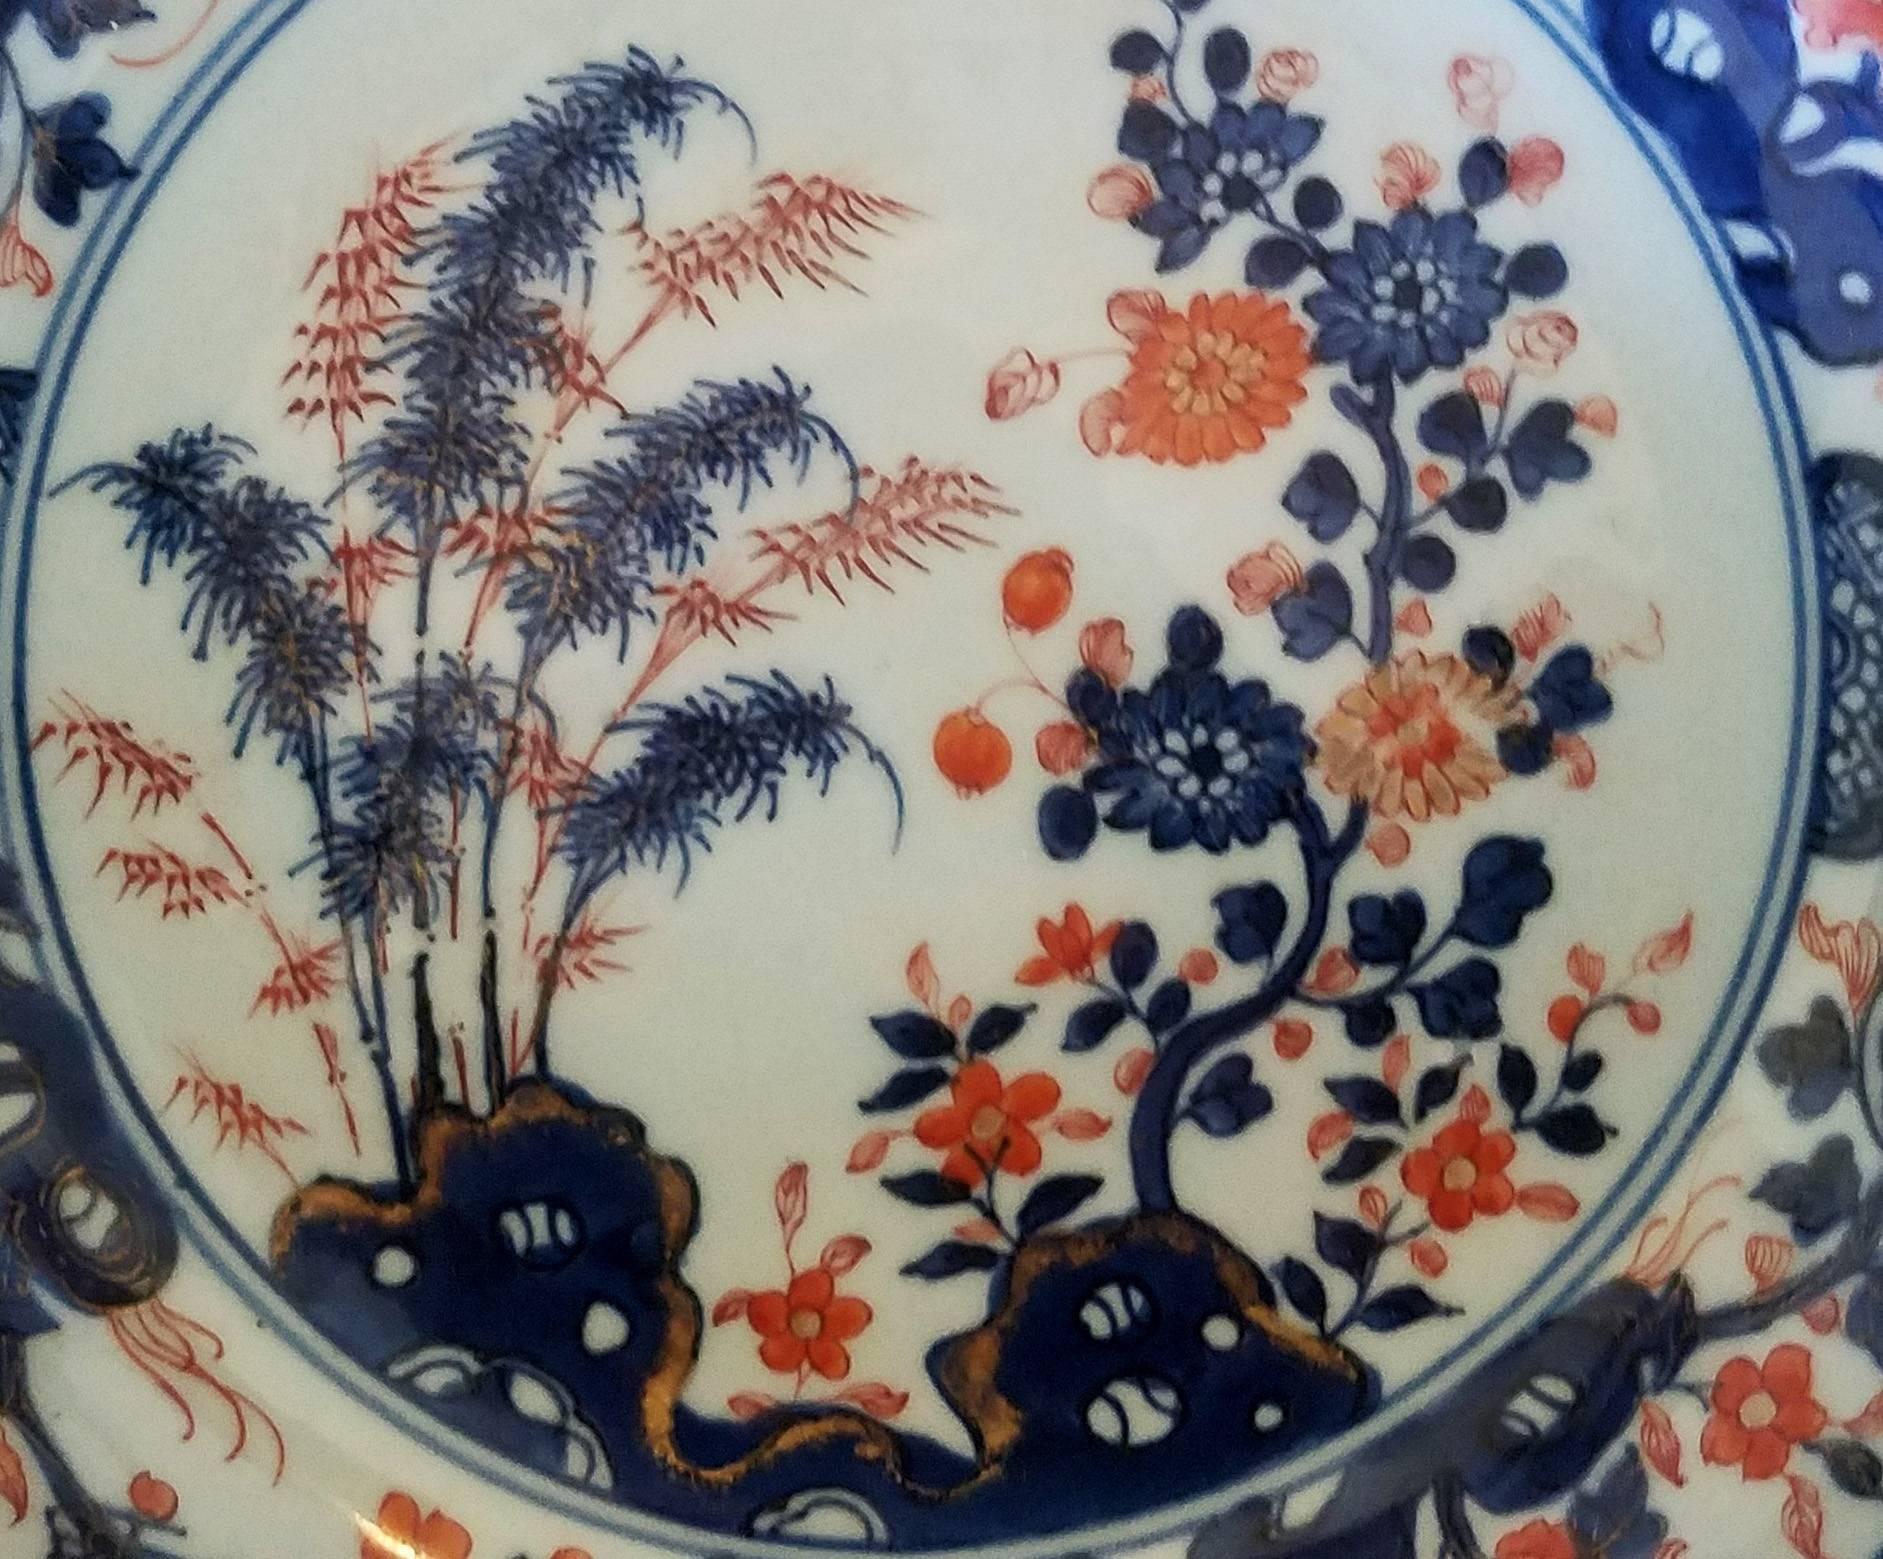 Chinese Export porcelain Imari saucer dish, 
circa 1770-1780.

The Chinese Imari porcelain large dish is painted in underglaze colors of red and blue with gilt highlights. The central scene depicts to the left a rock outcrop with bamboo plates